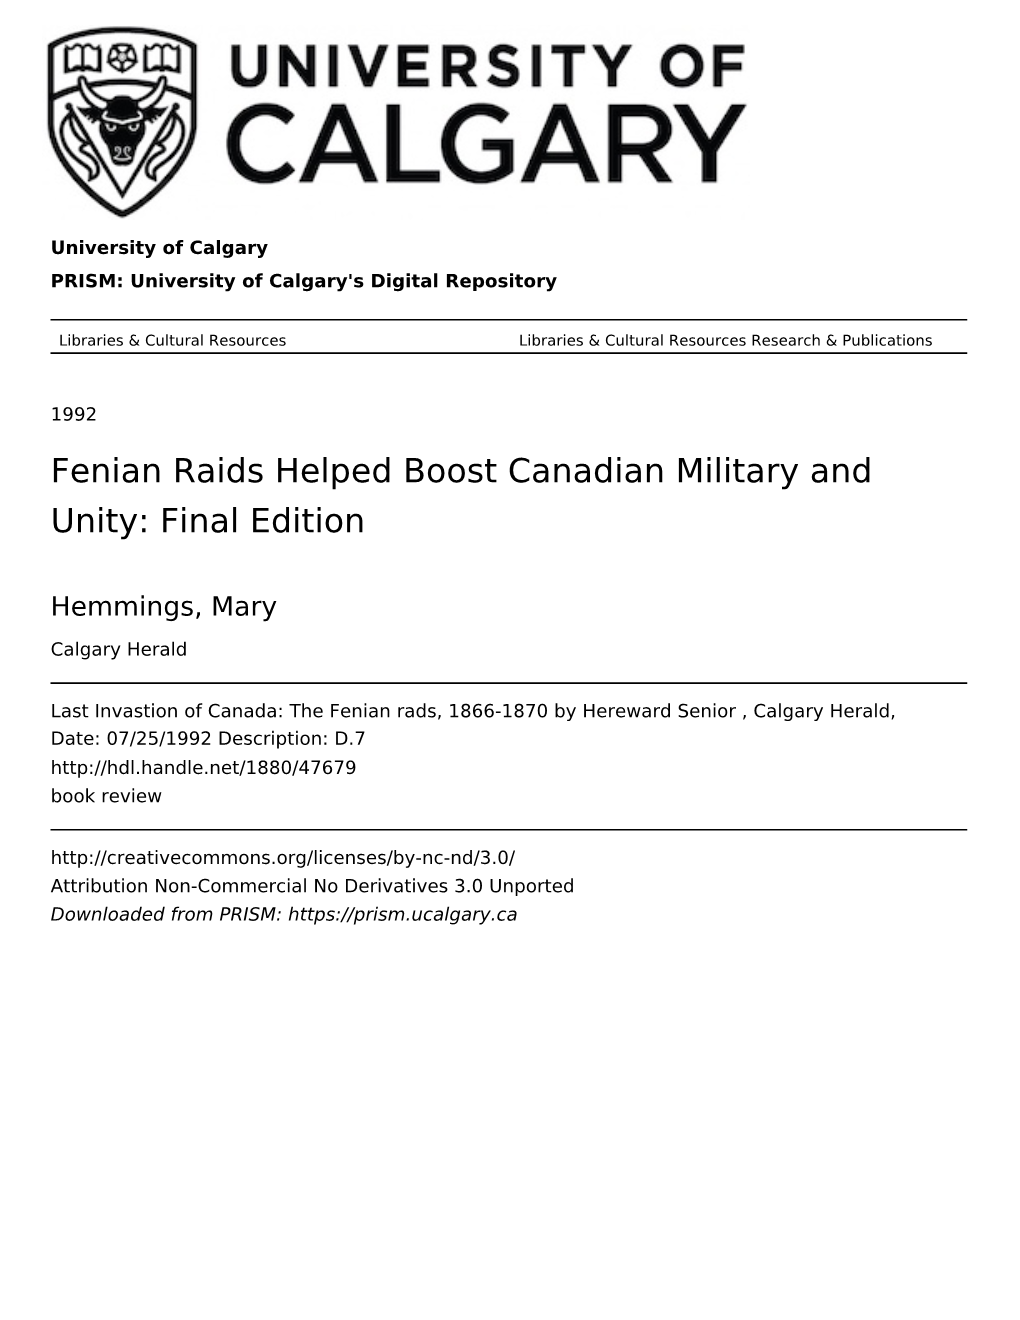 Fenian Raids Helped Boost Canadian Military and Unity: Final Edition